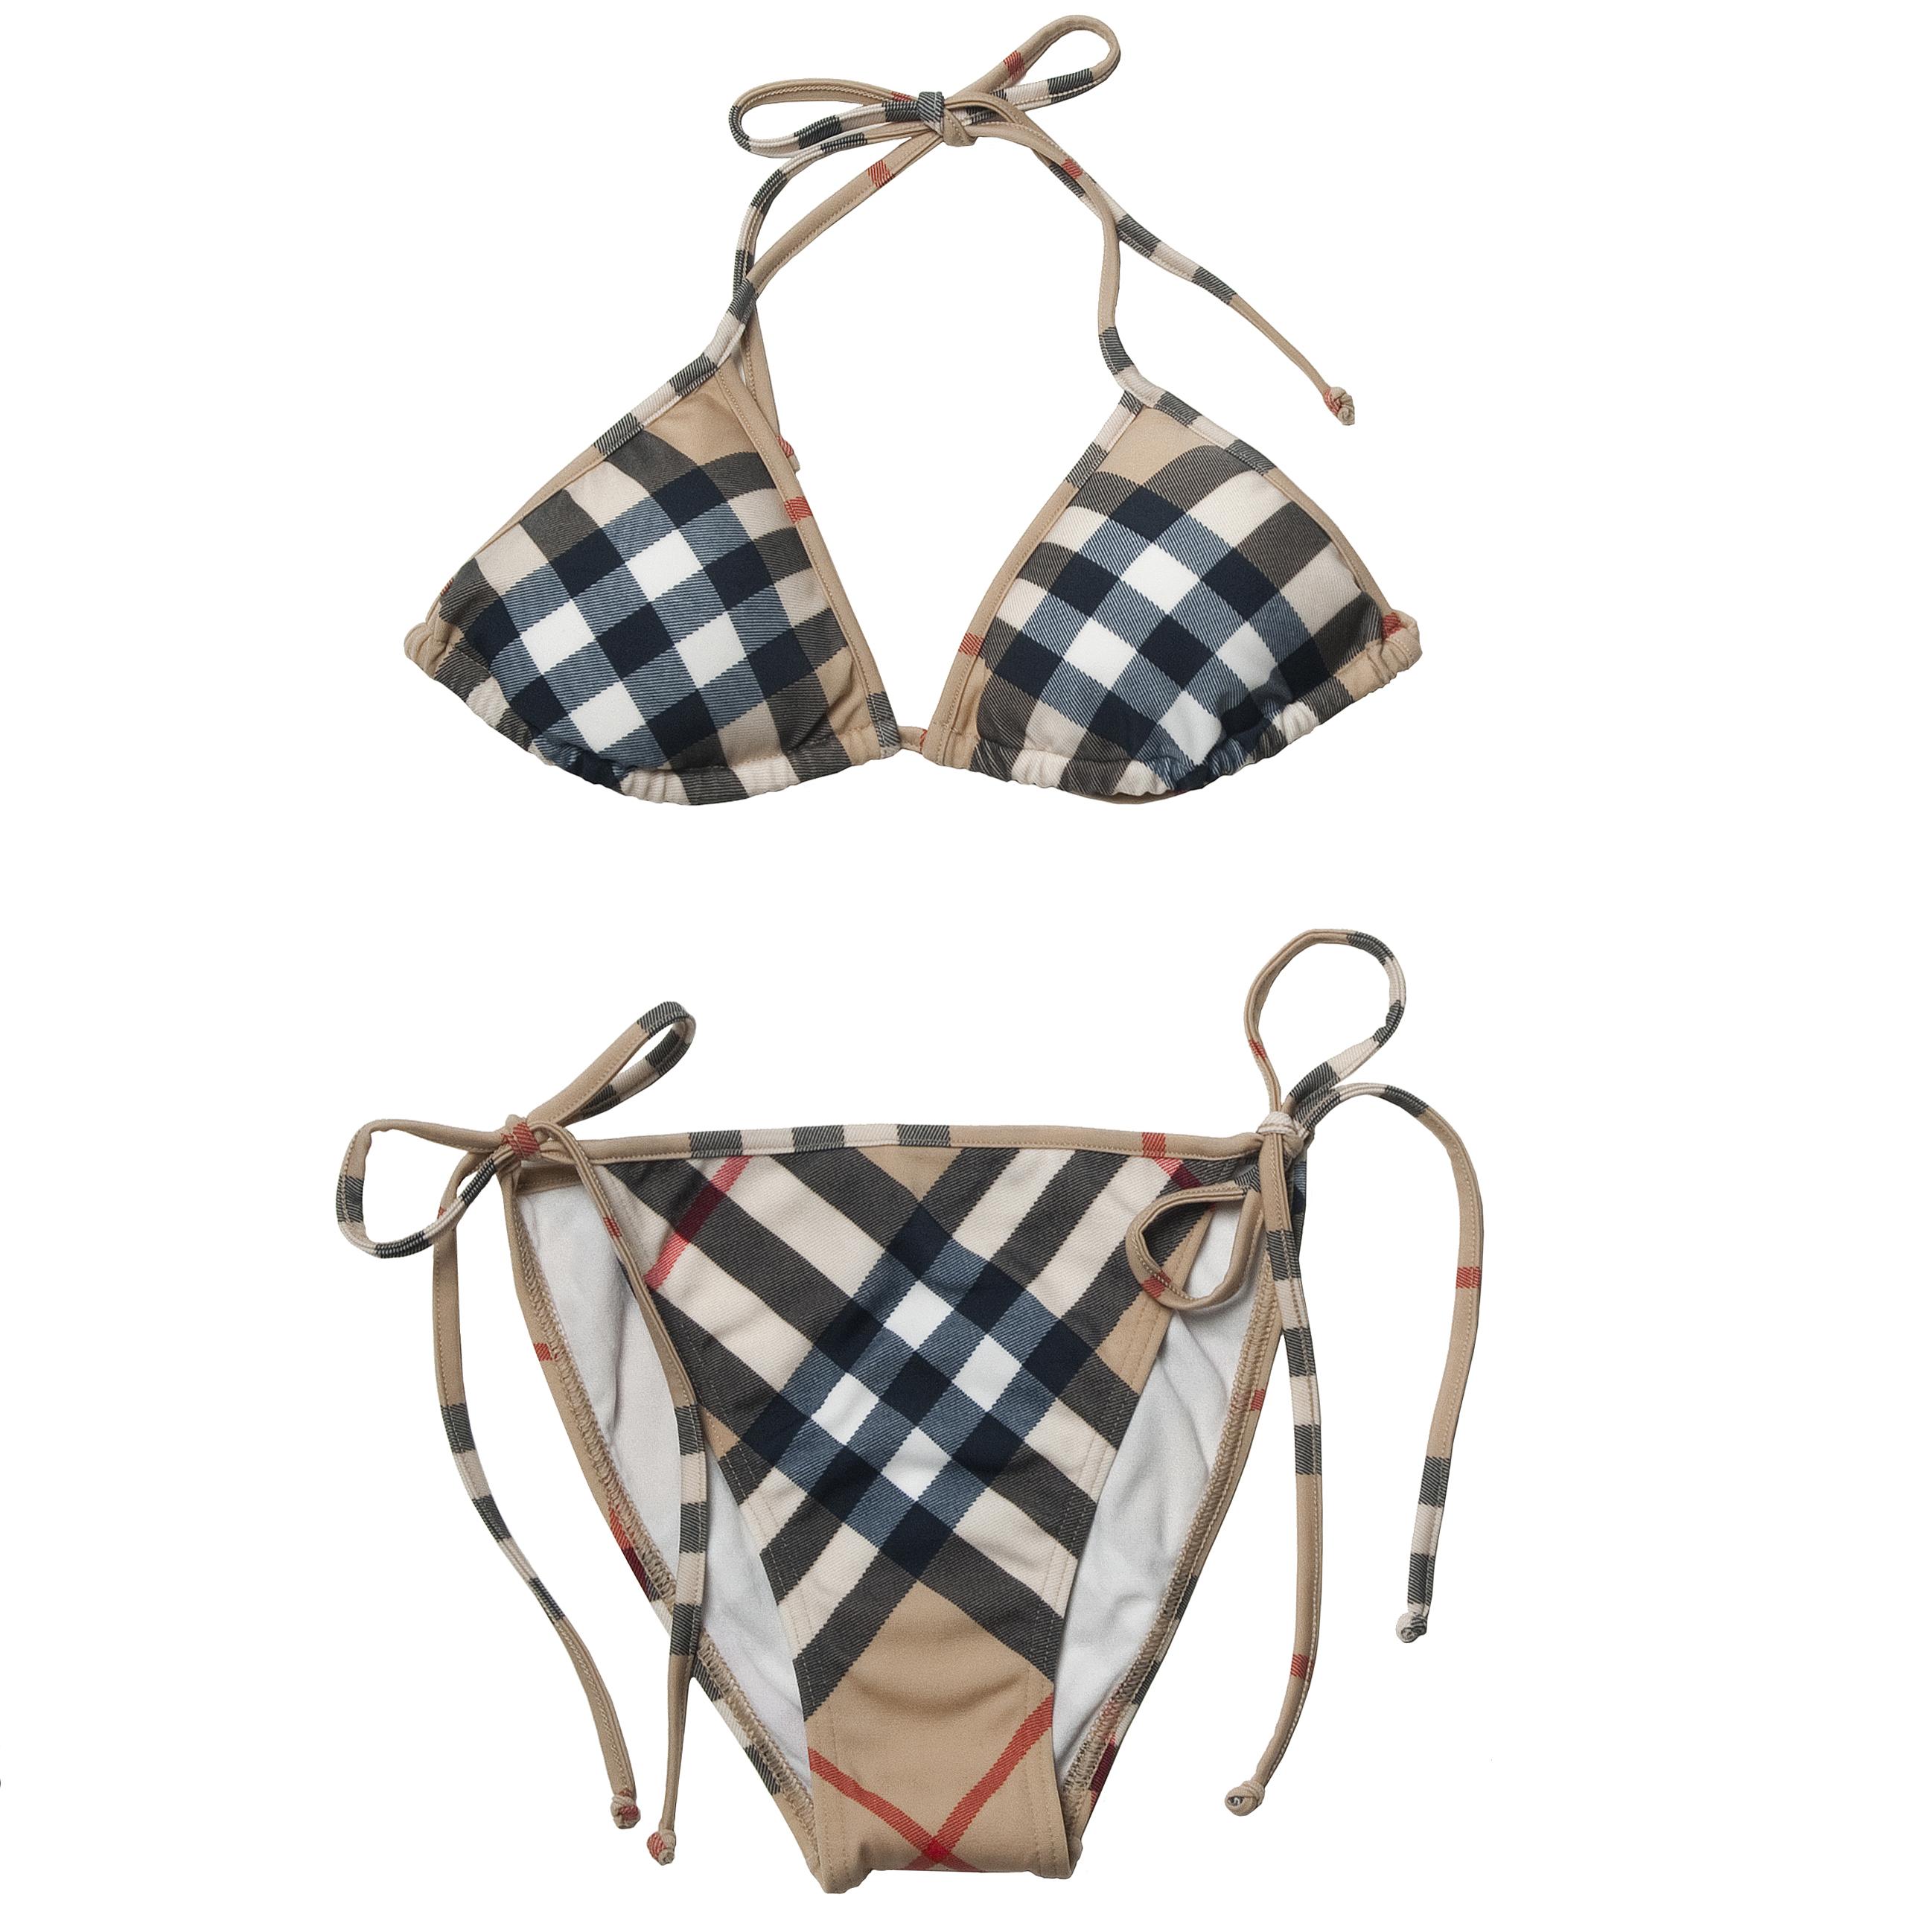 fake burberry bathing suit